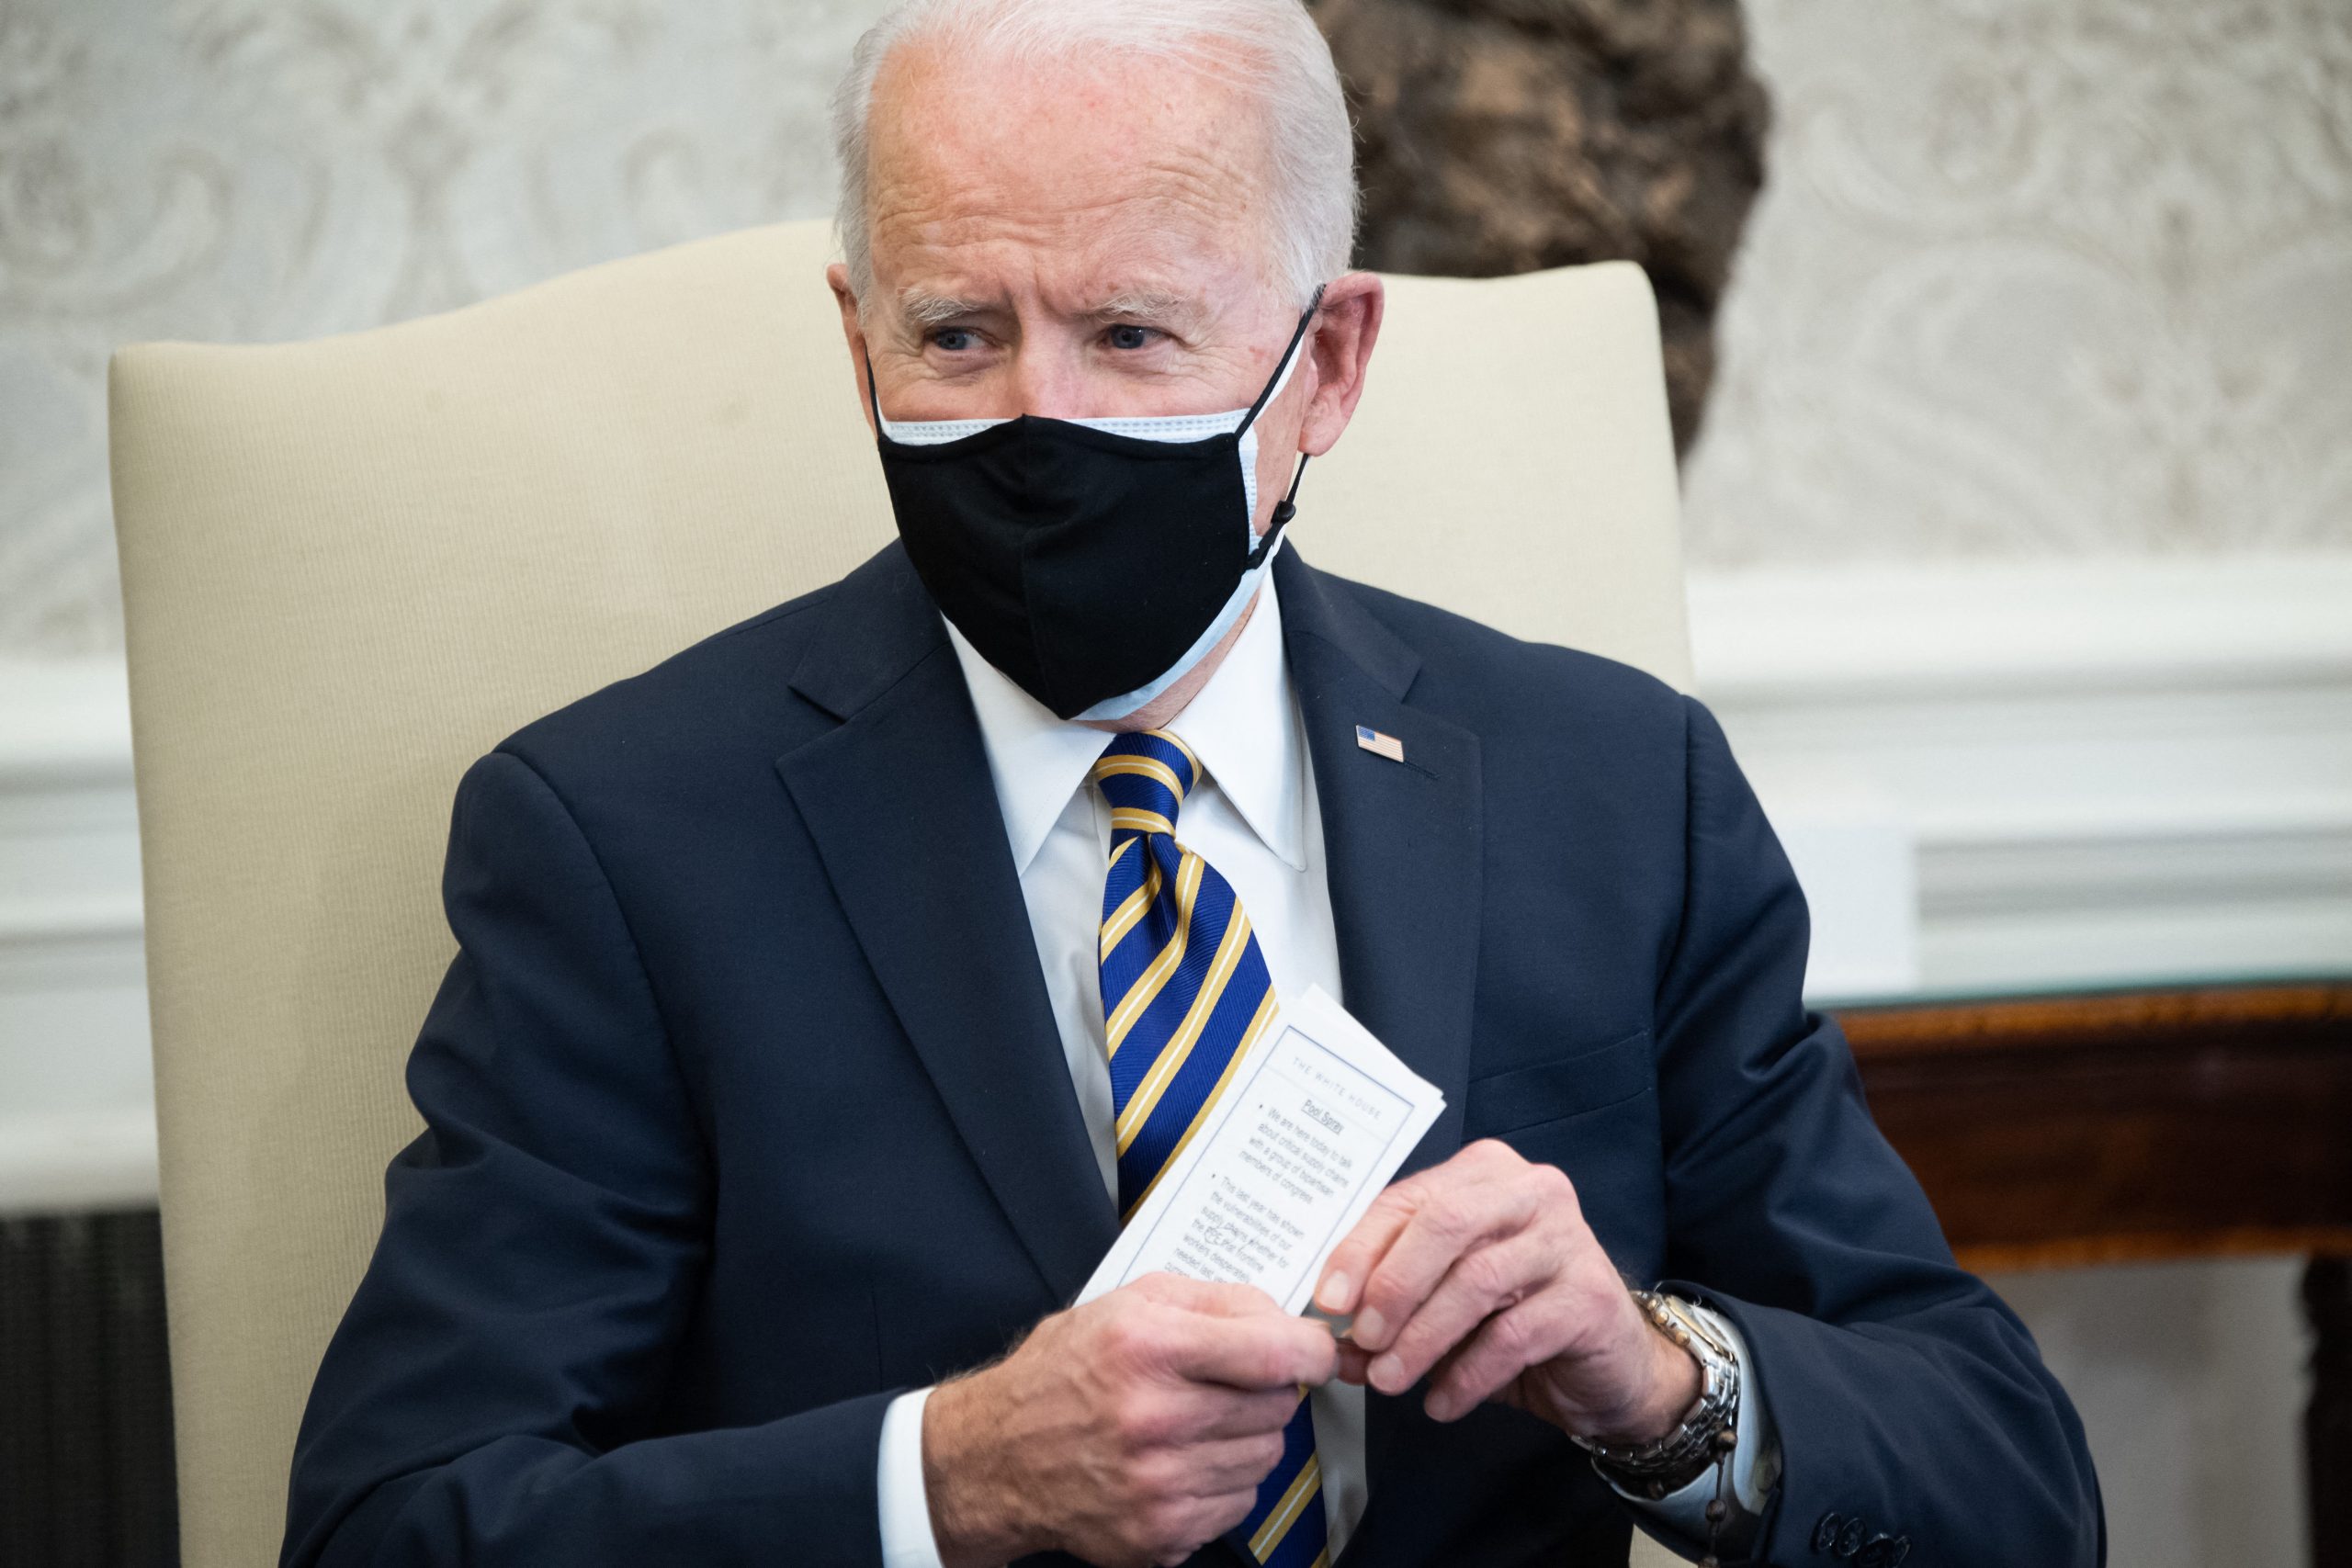 US President Joe Biden restricts travel from India to US due to the COVID-19 outbreak